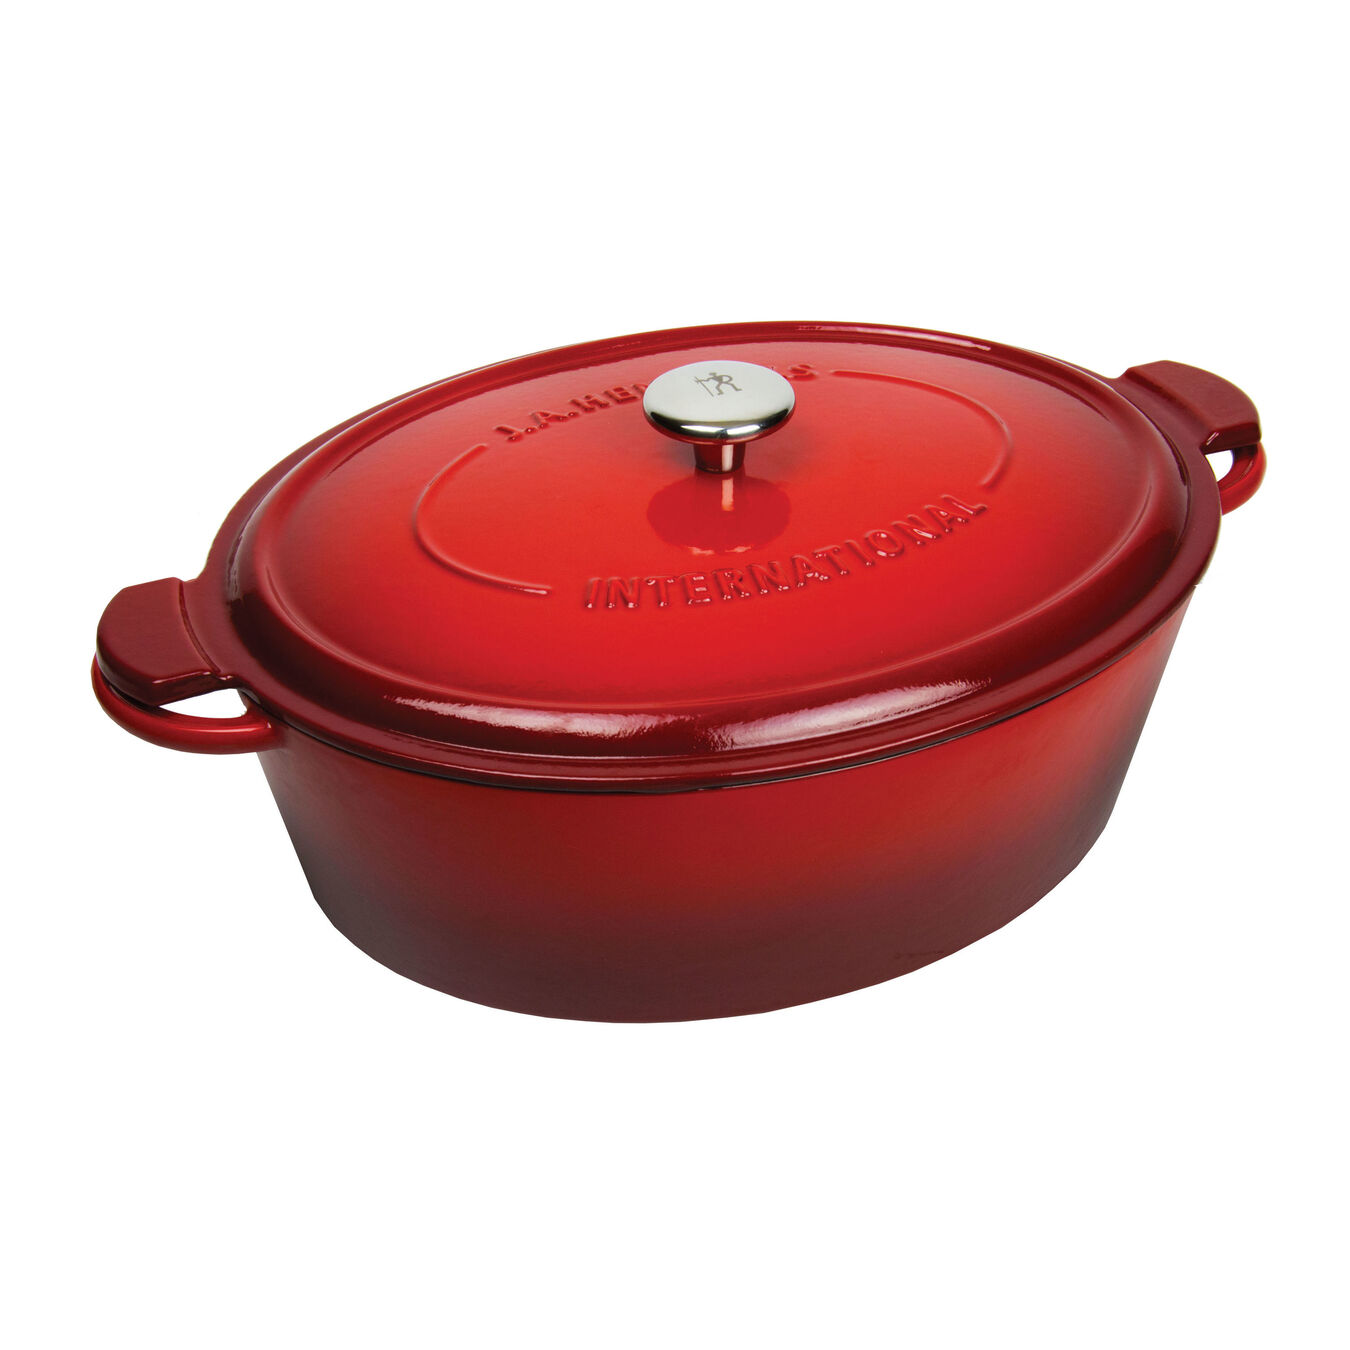 6 l oval French oven, red,,large 1